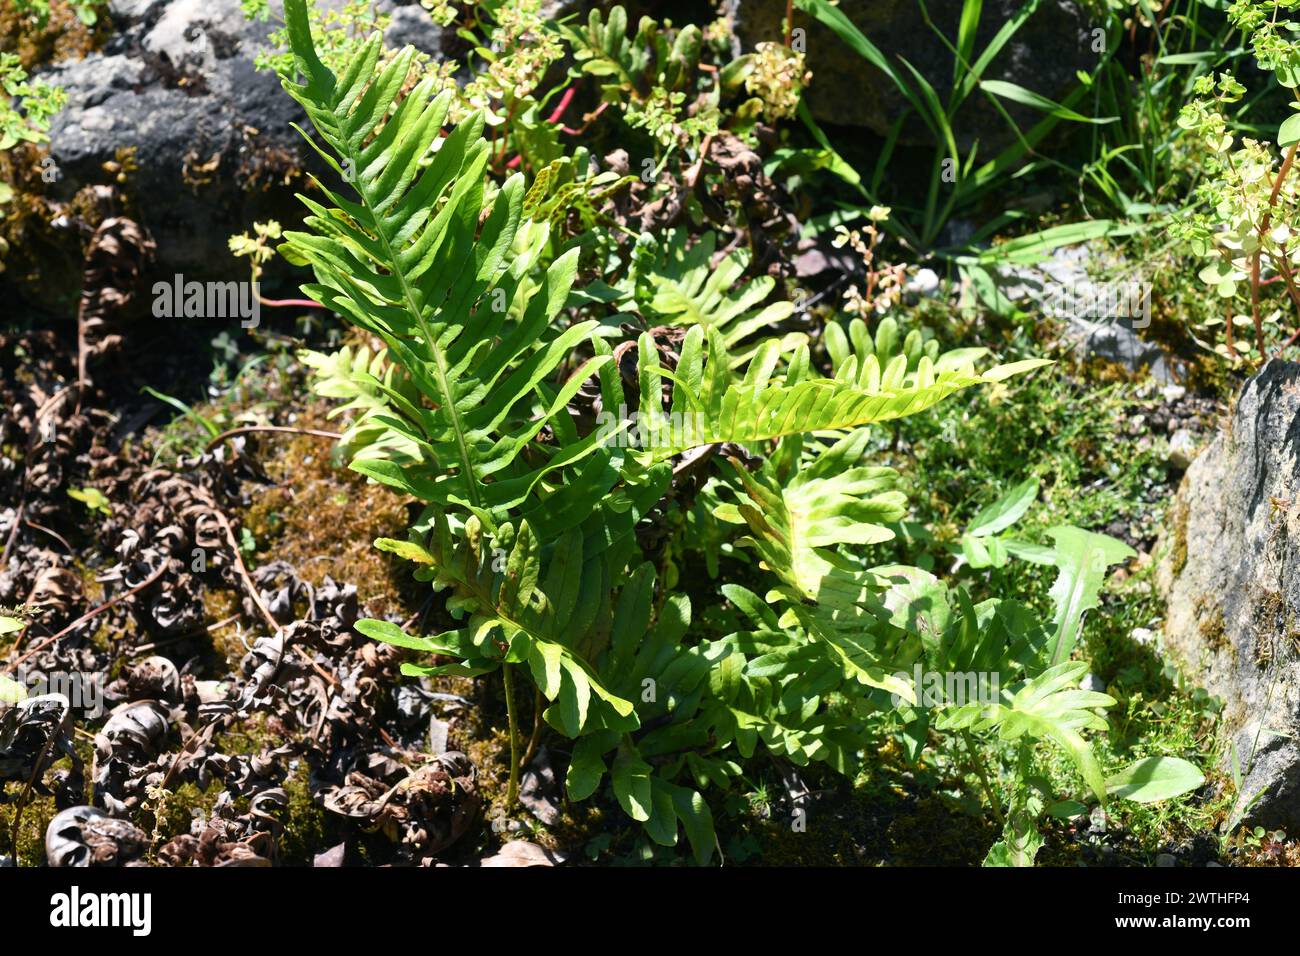 Polypodium cambricum is a fern native to Mediterranean basin and western Europe. This photo was taken in Asturias, Spain. Stock Photo